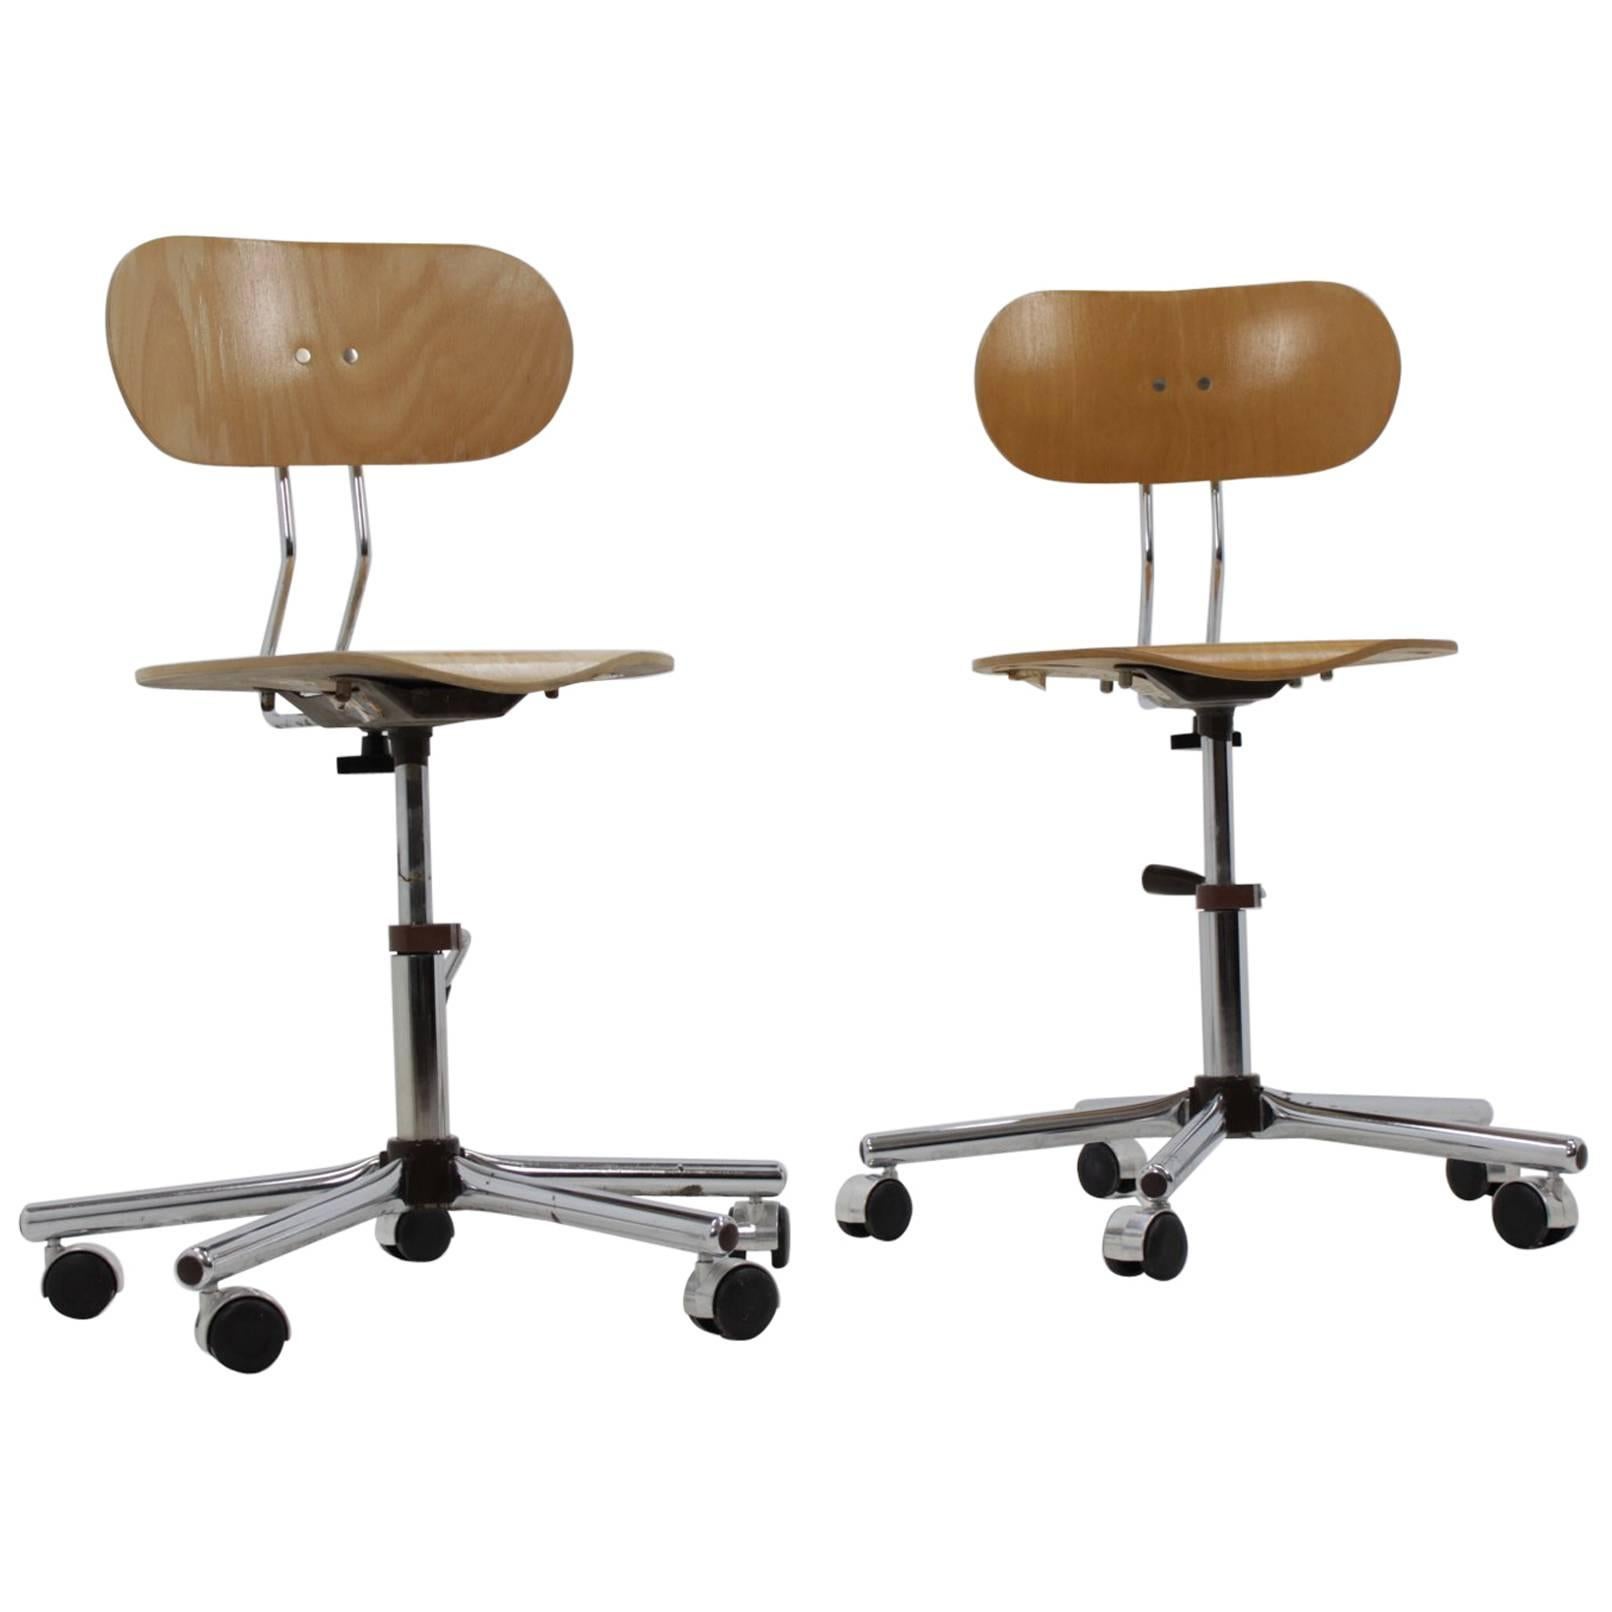 Set of Industrial Chrome Office Chairs